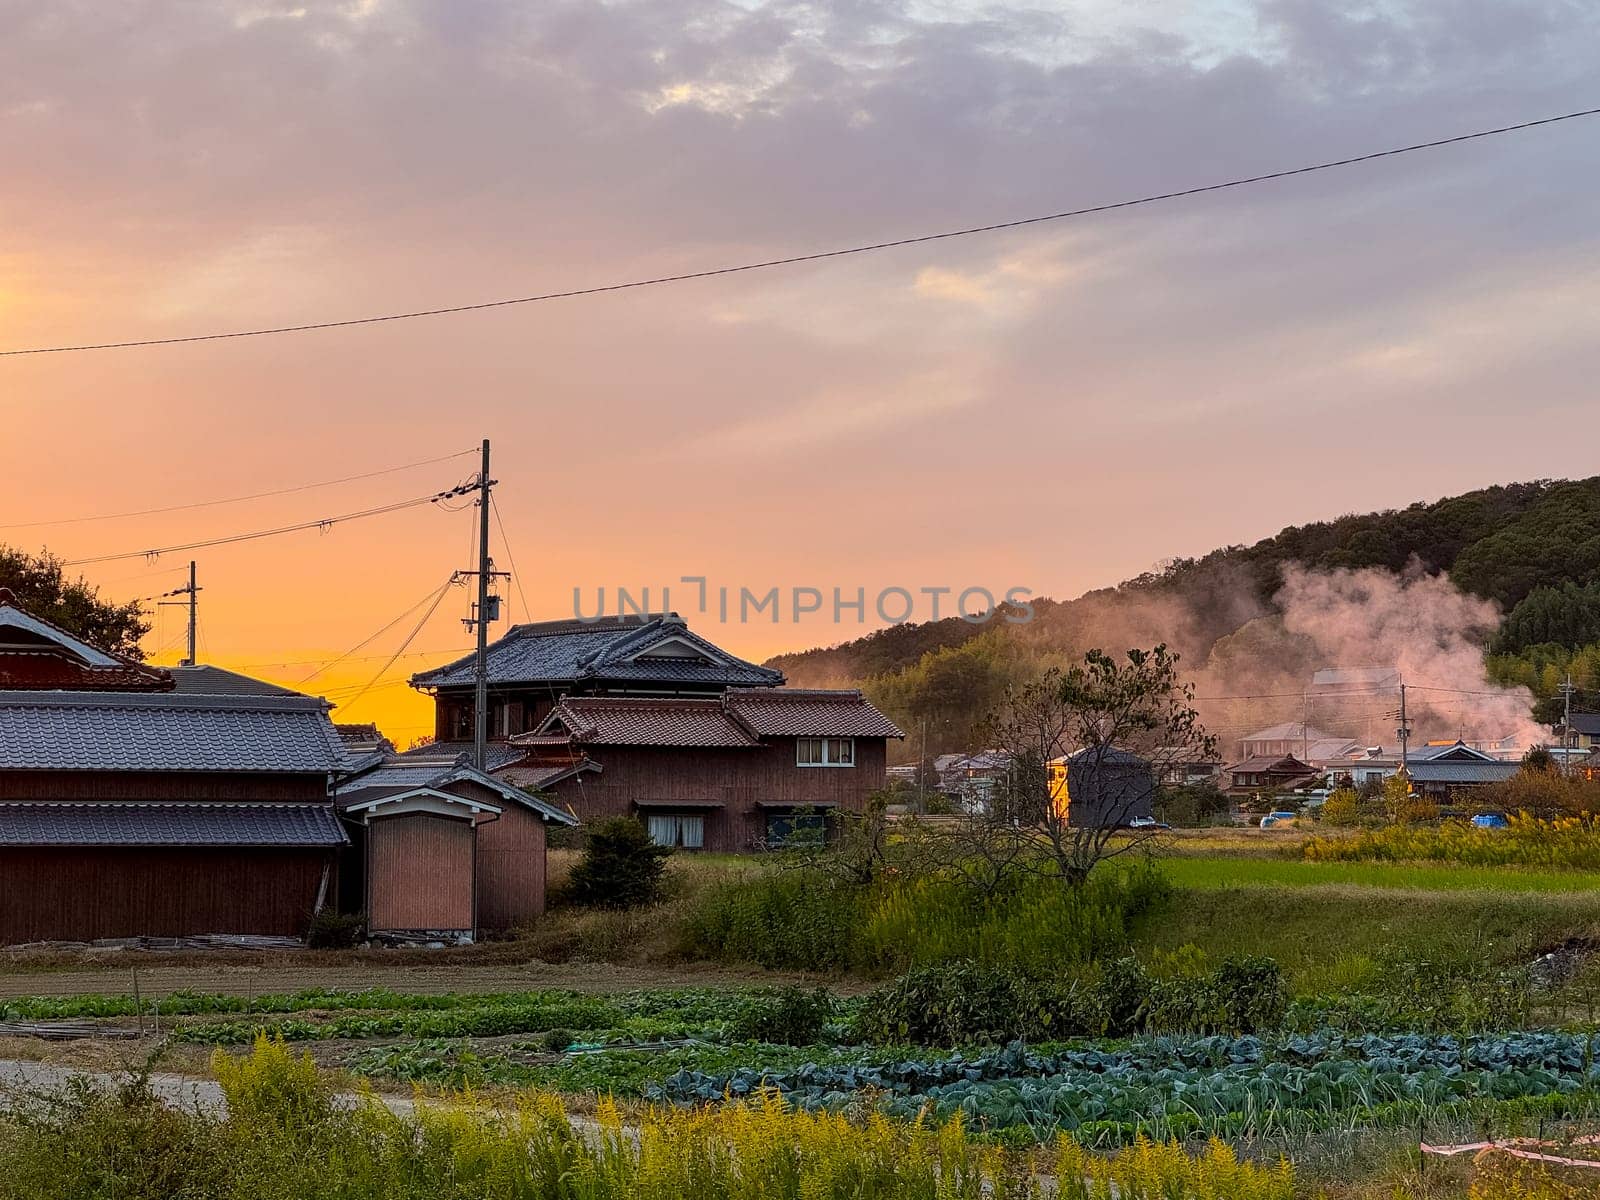 Smoke rises from fire by traditional houses in rural Japan with sunset glow in sky. High quality photo